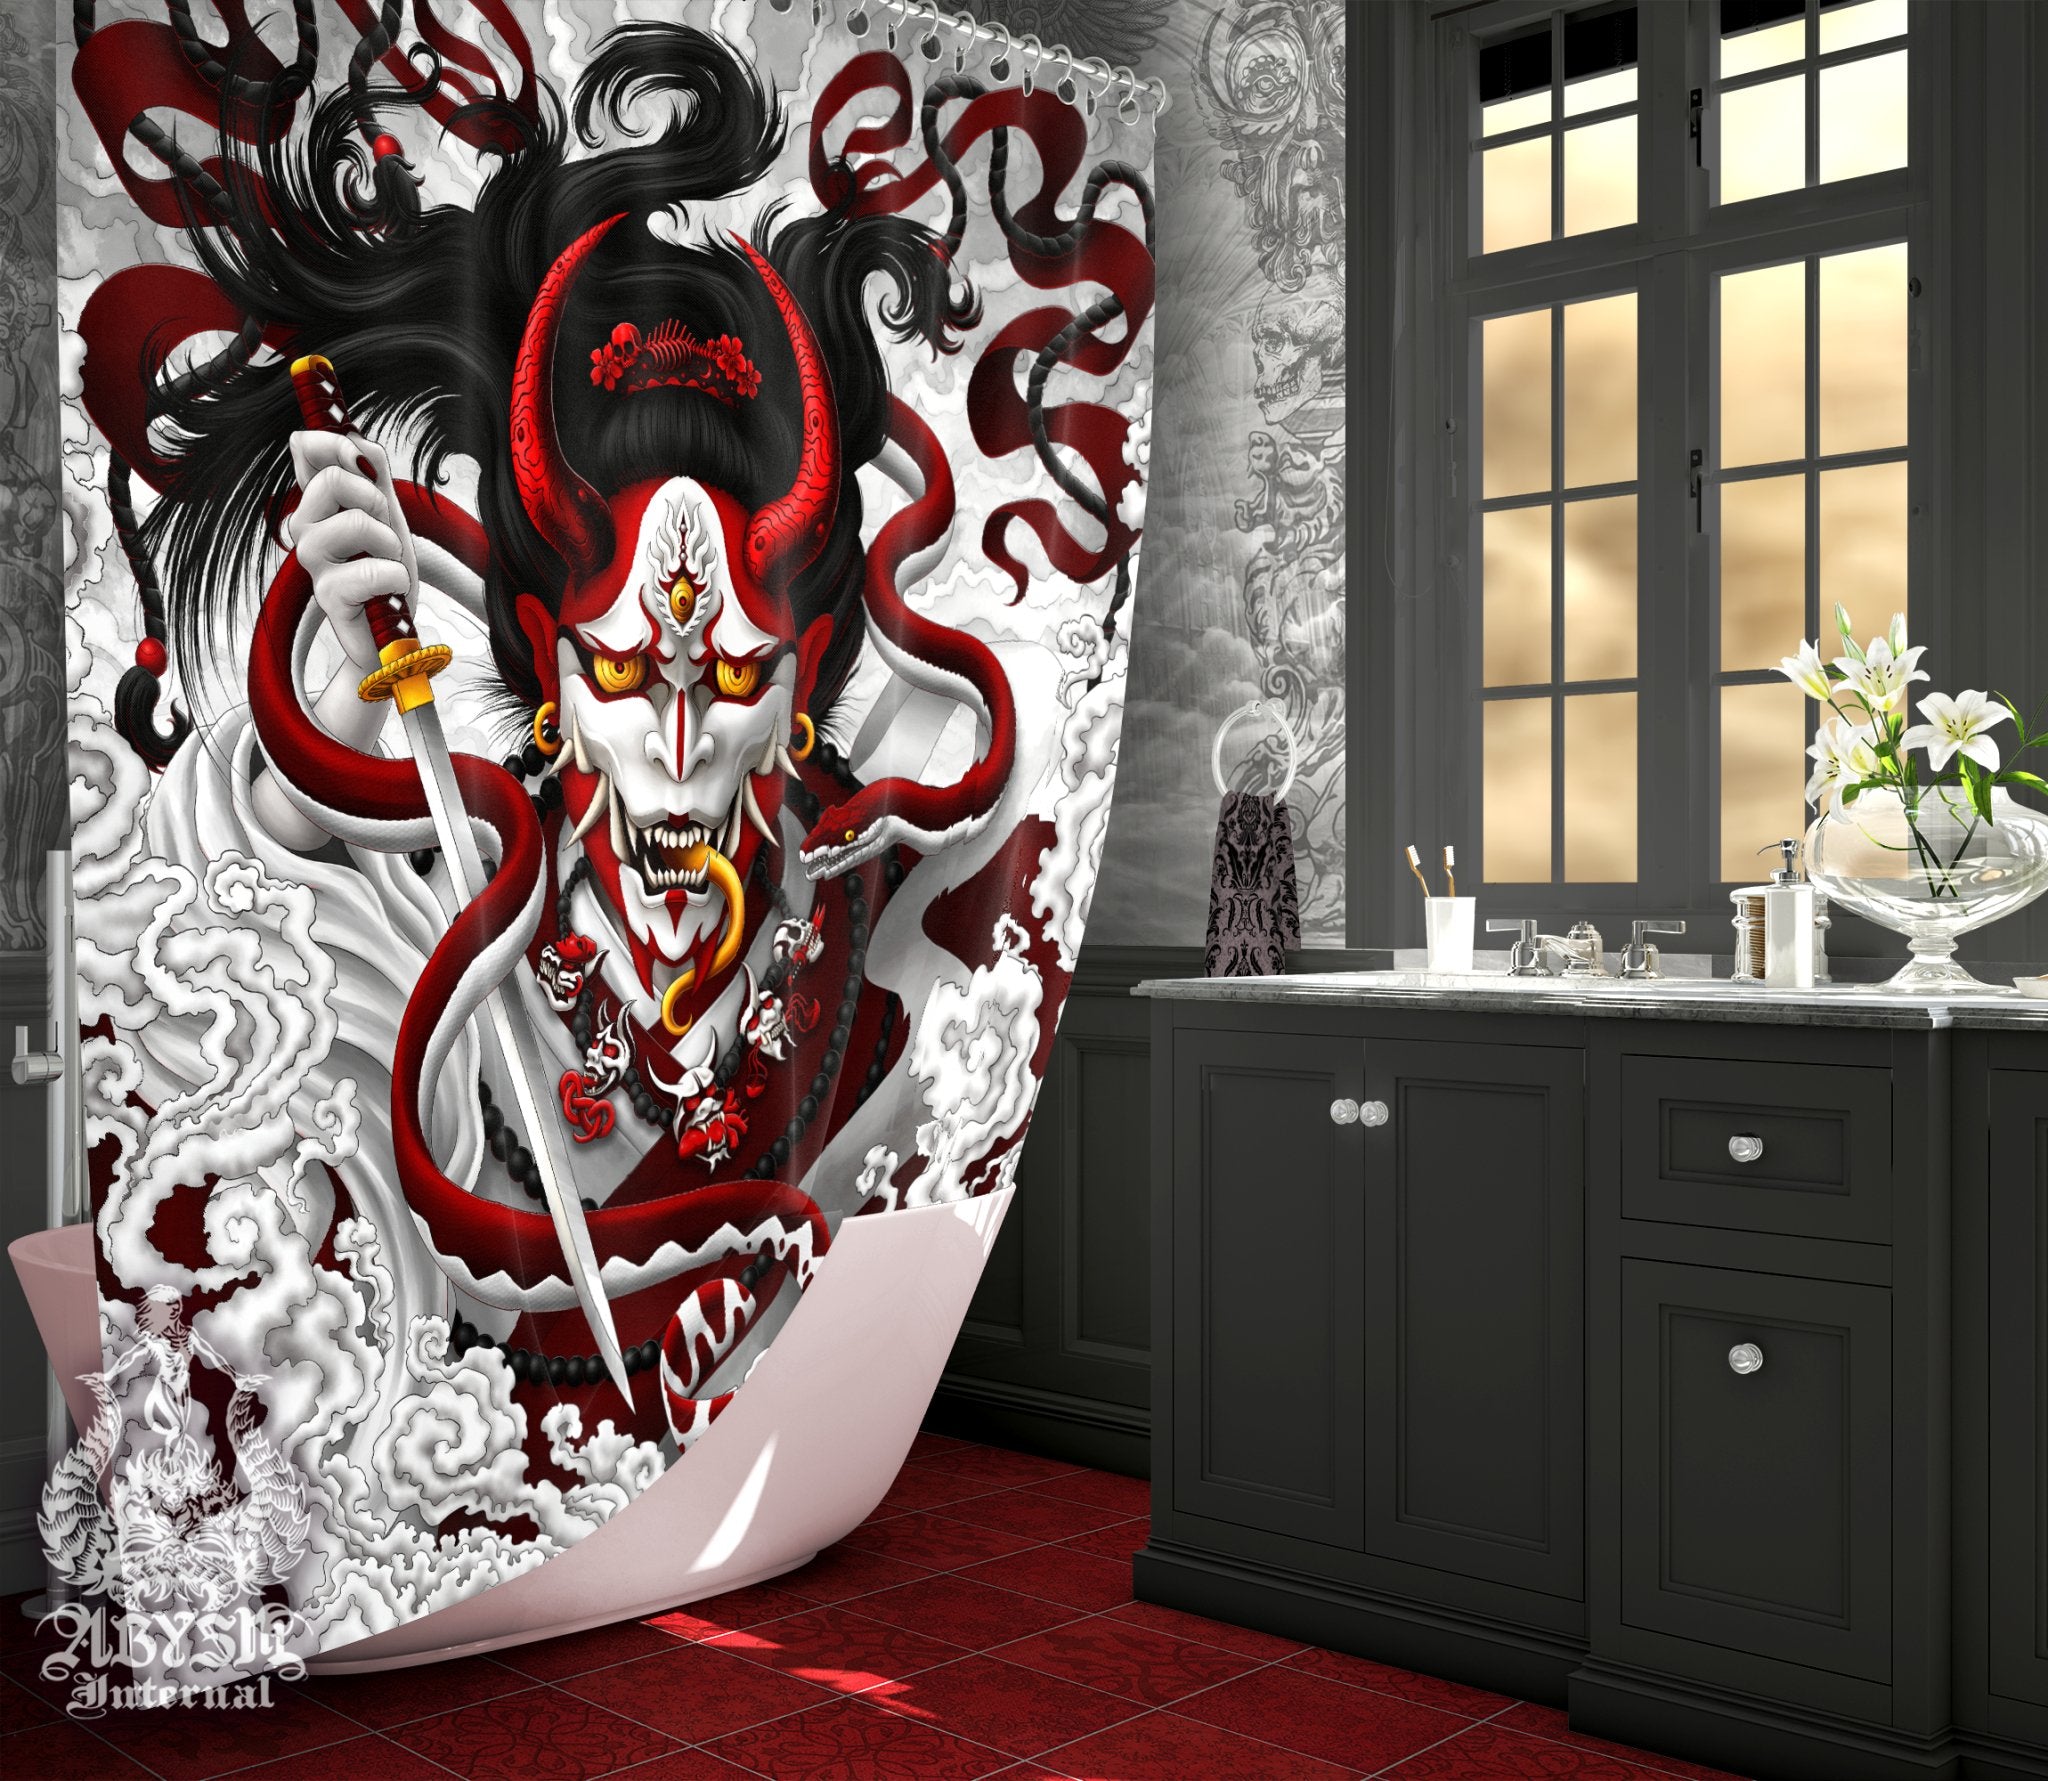 White Goth Hannya Shower Curtain, 71x74 inches, Japanese Demon, Youkai Anime and Gamer Bathroom Decor - Snake, Red - Abysm Internal